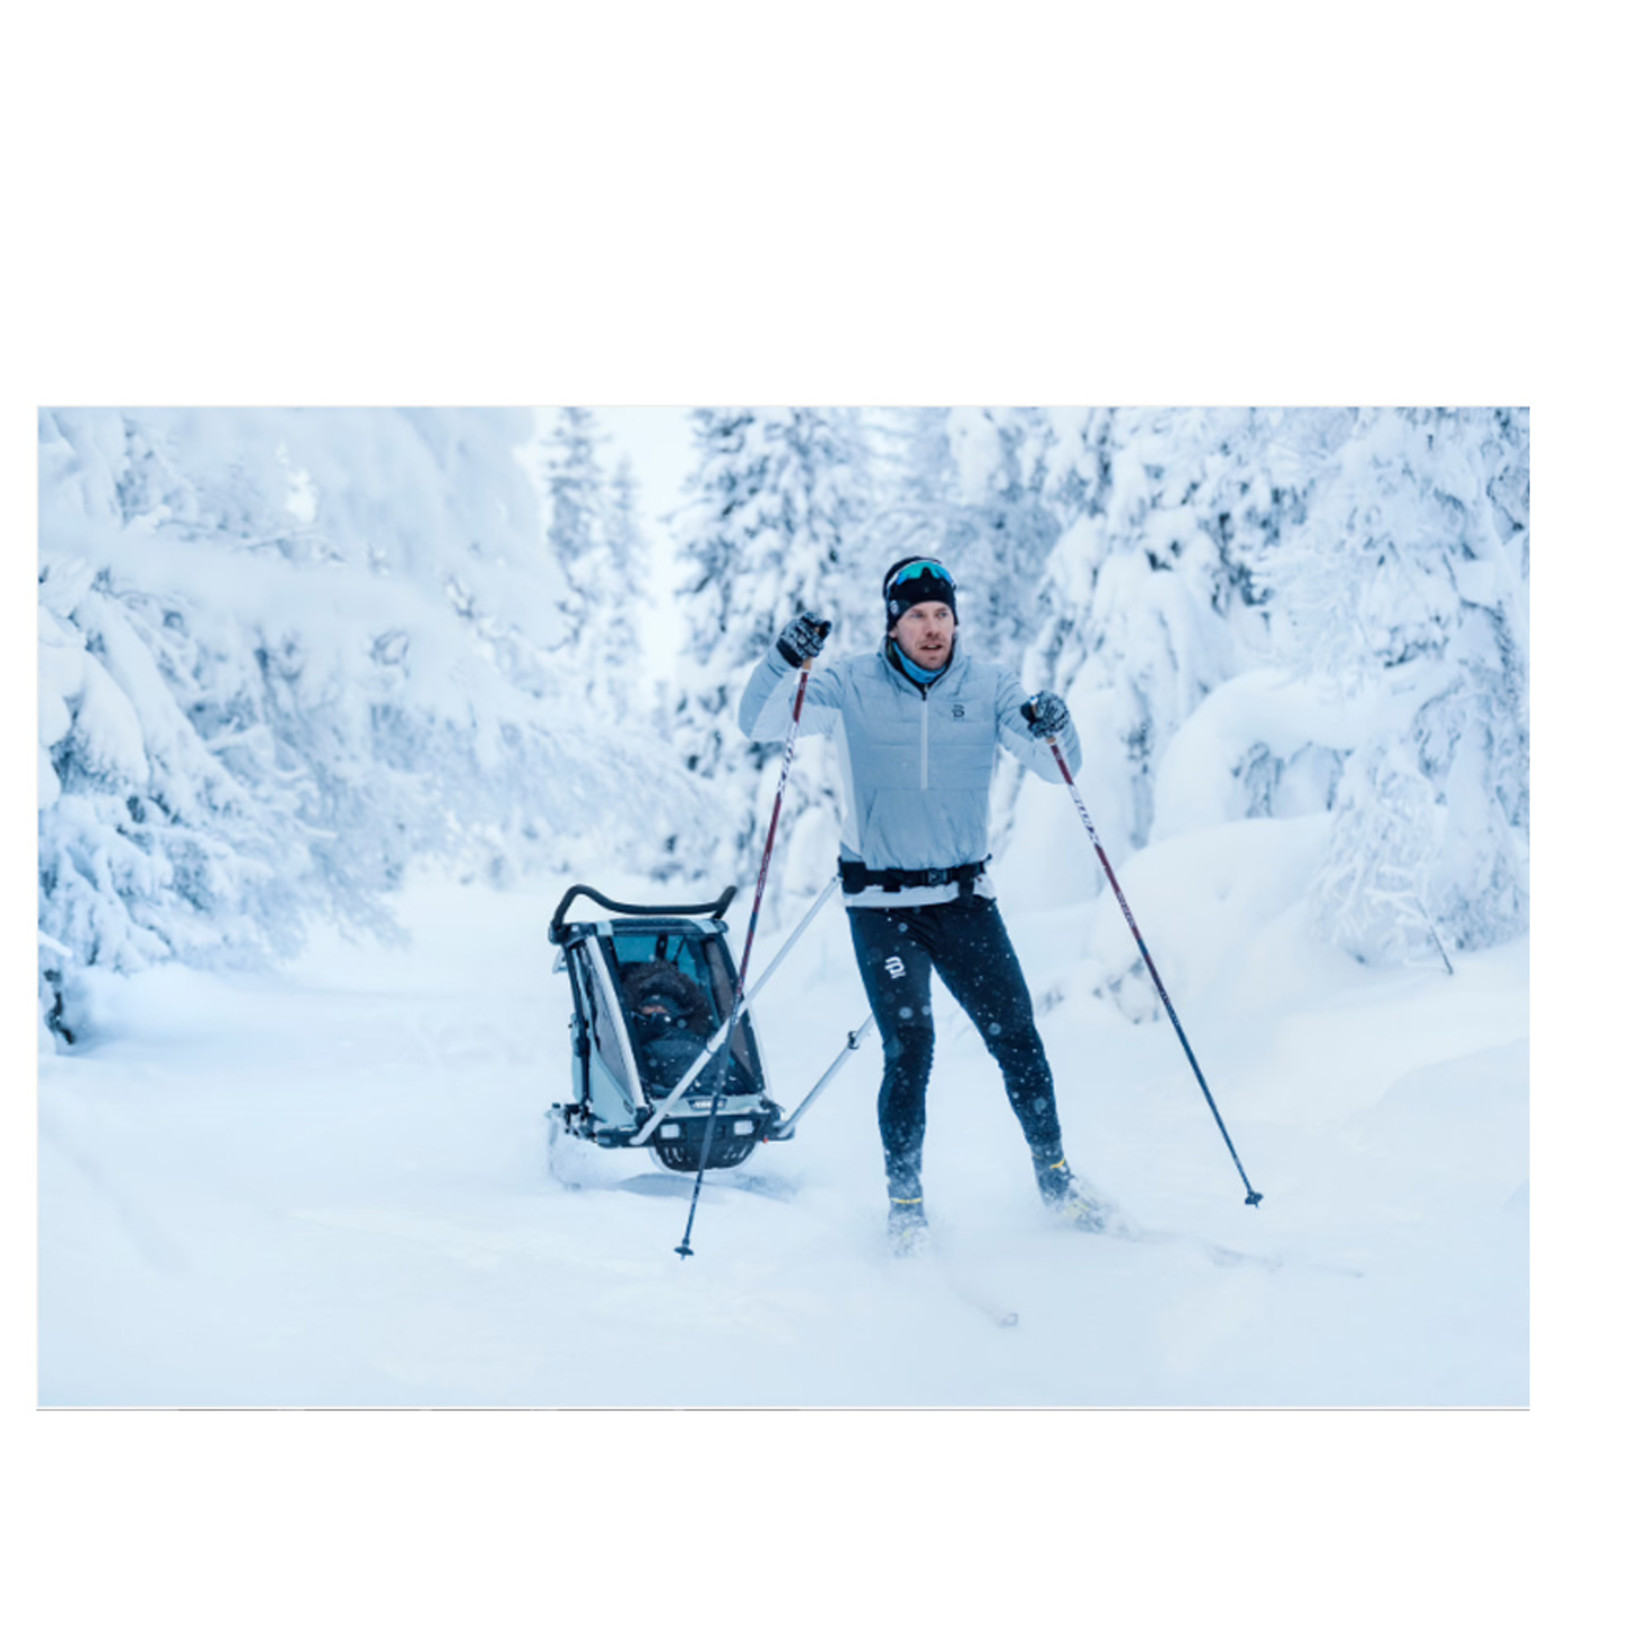 Thule Thule Chariot Cross-Country Skiing Kit 20201401 - Gray